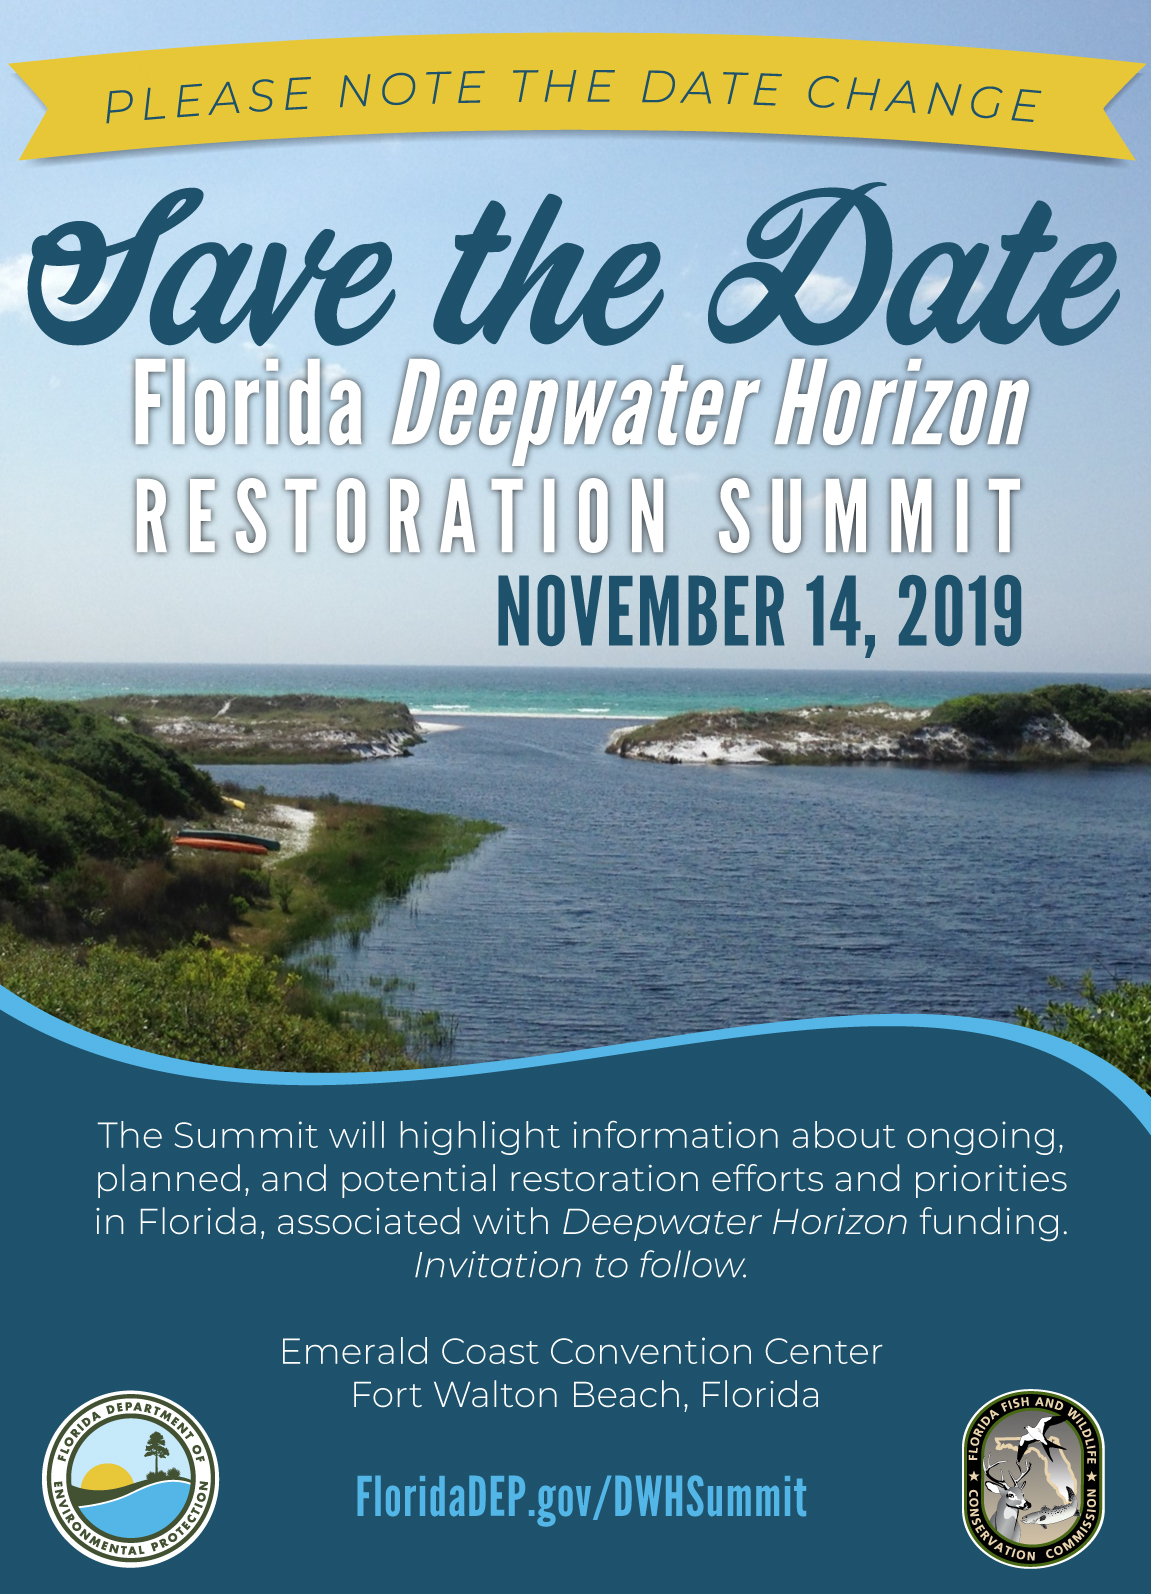 Save the Date, Florida Deepwater Horizon Restoration Summit, November 19, 2019 - The Summit will highlight information about ongoing, planned, and potential restoration efforts and priorities  in Florida, associated with Deepwater Horizon funding.